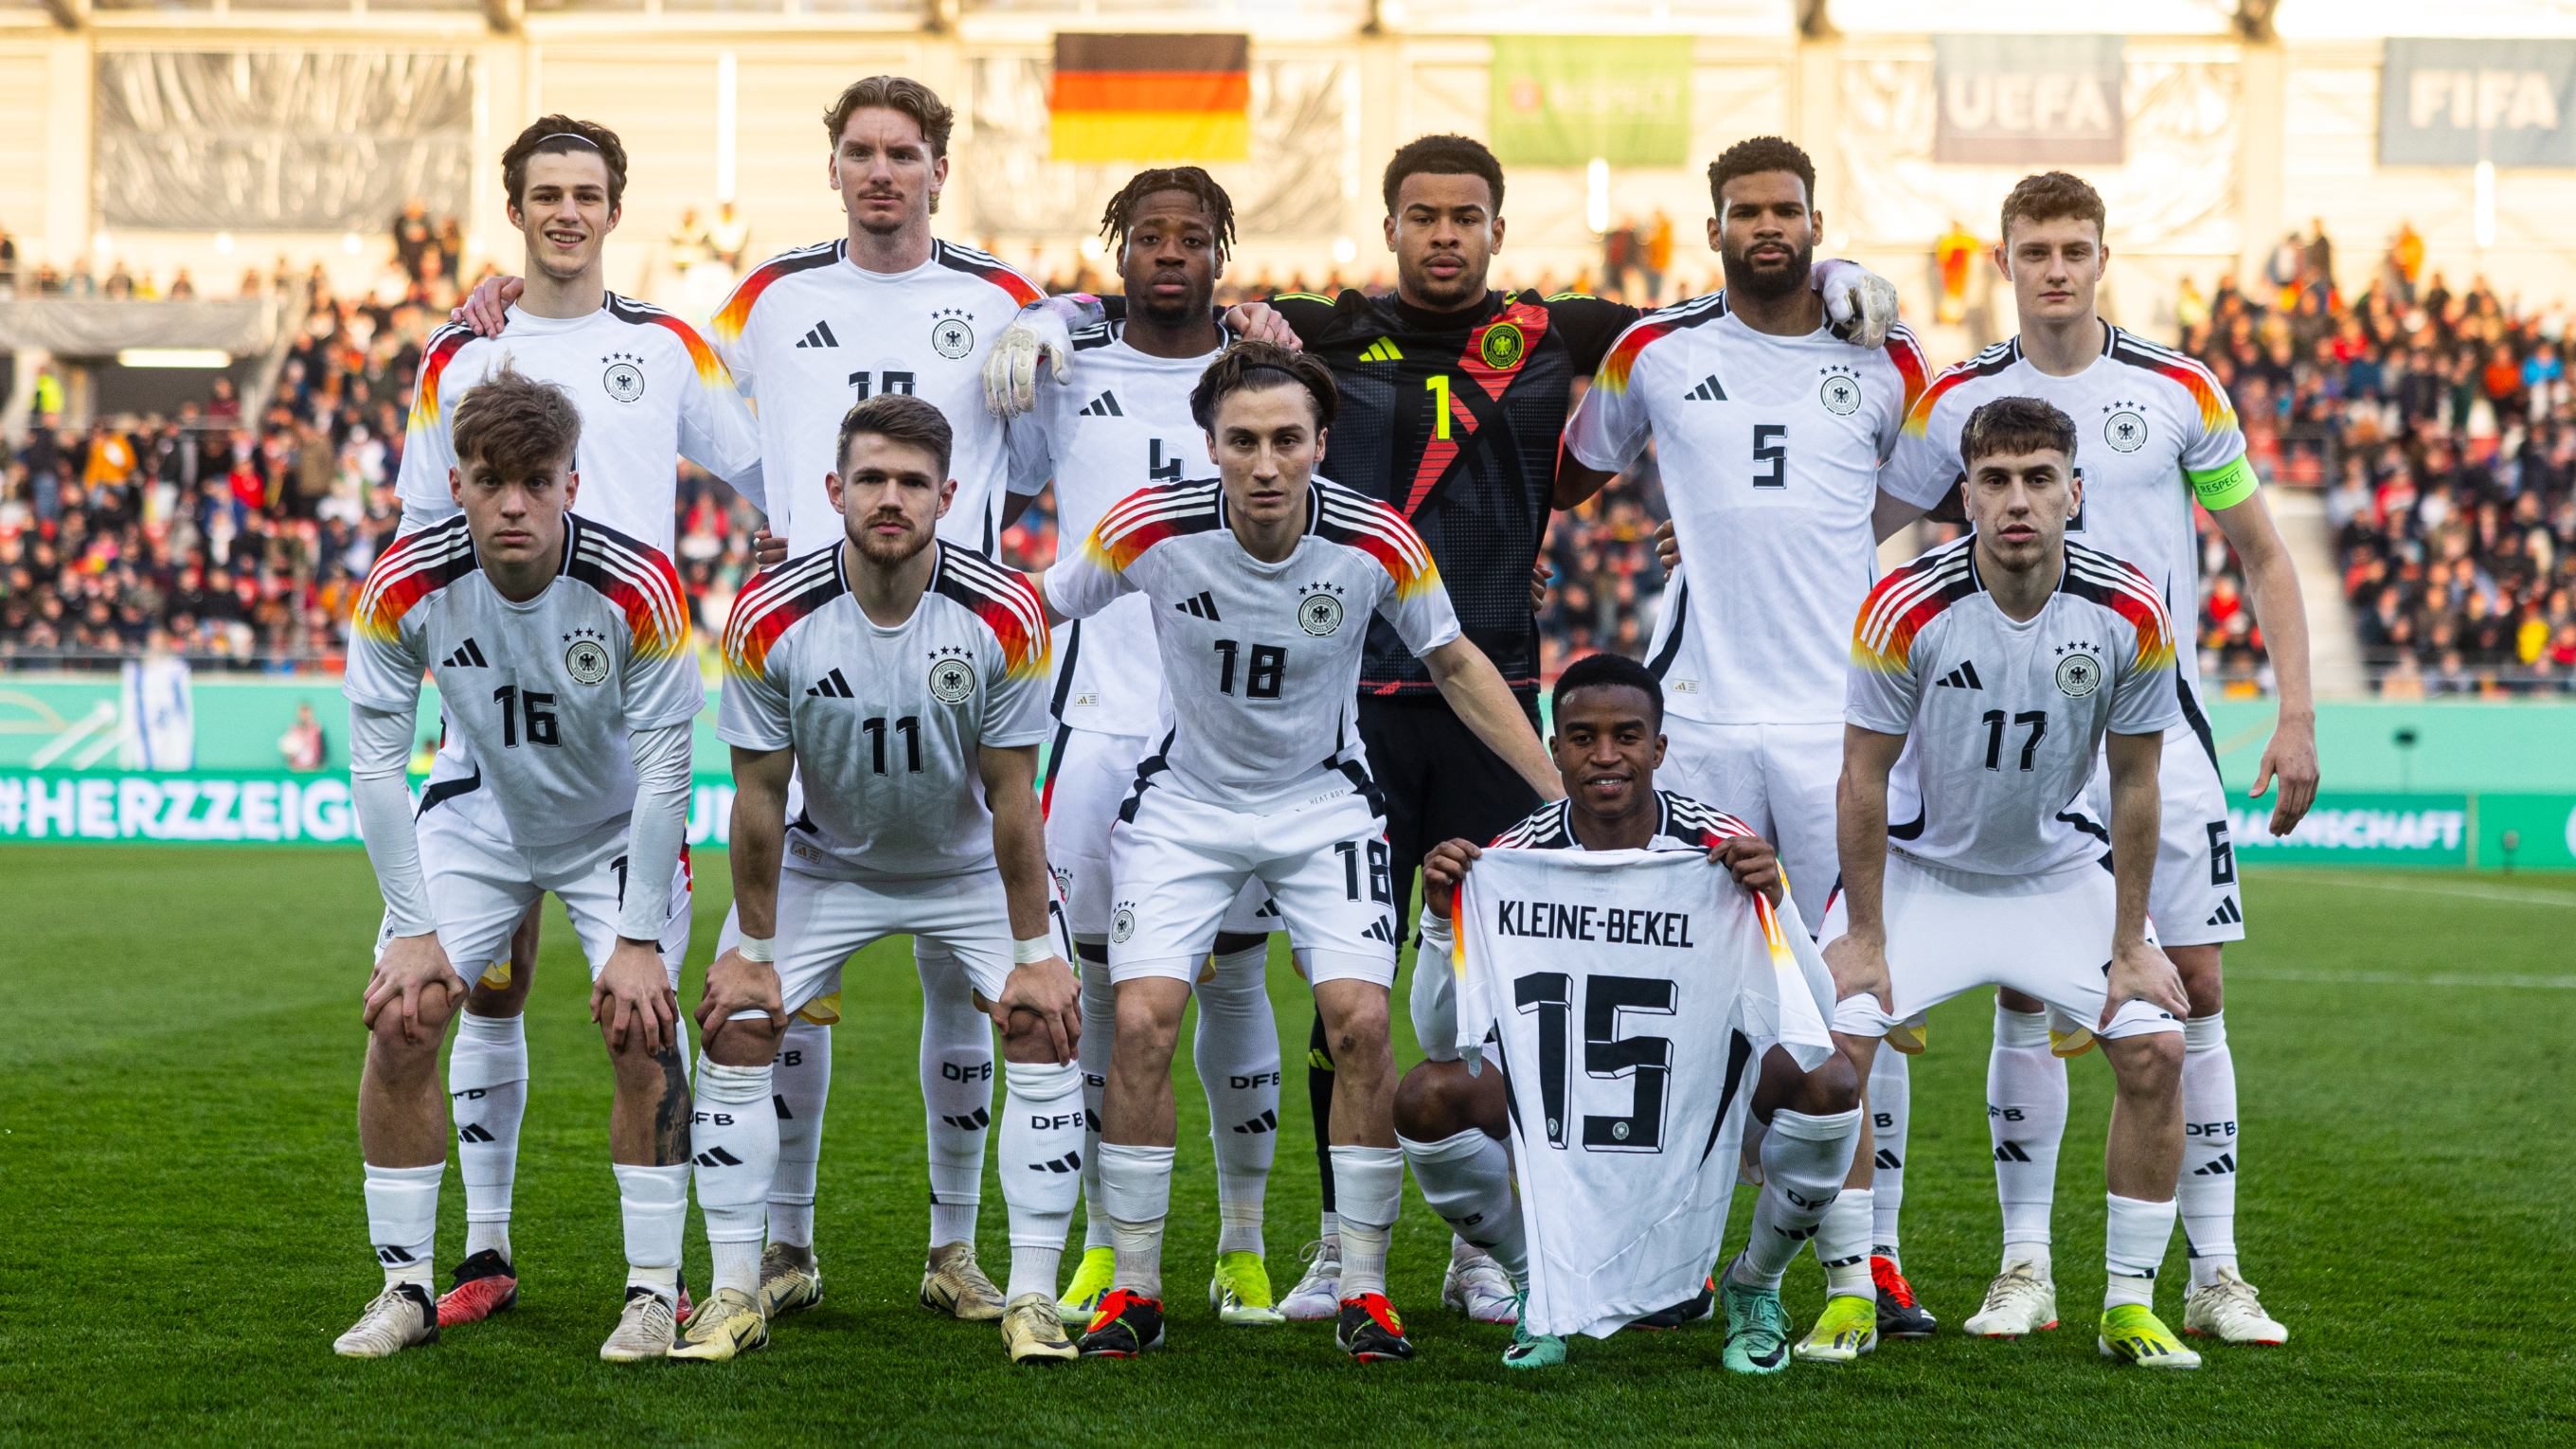 The U21s wore the new Germany kit for the first time on Tuesday © Thomas Böcker/DFB